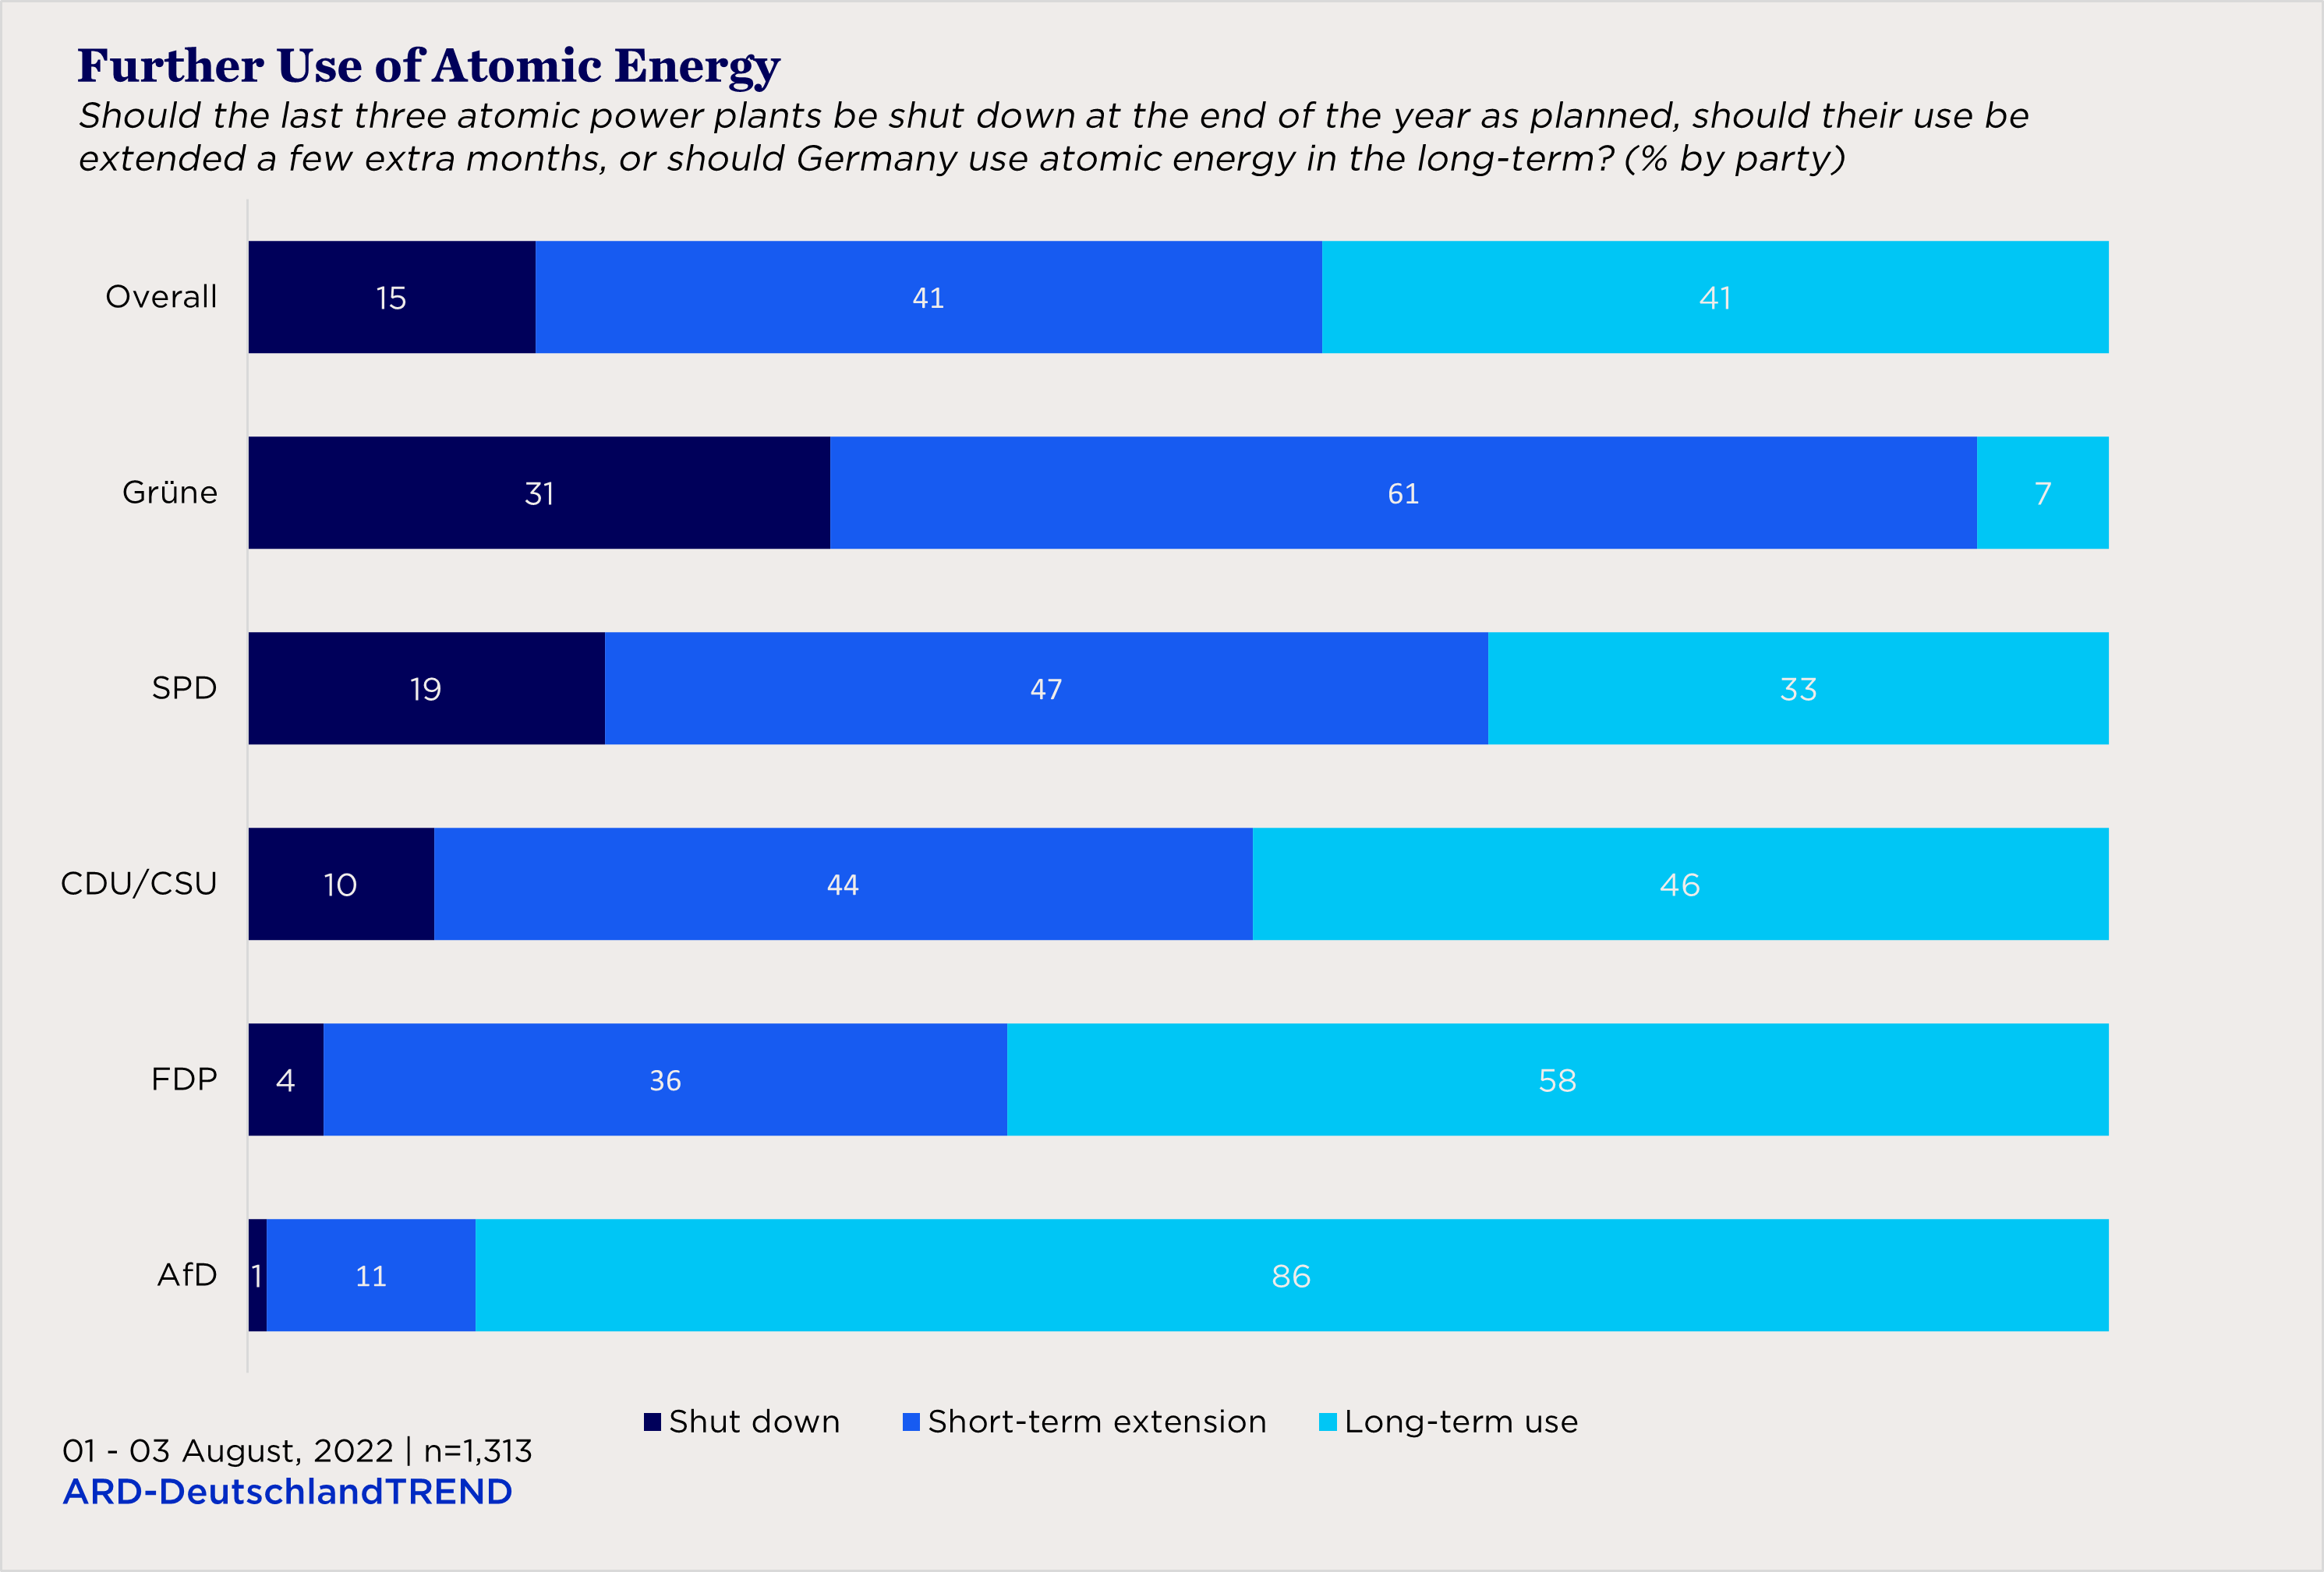 bar chart showing views of further use of atomic energy